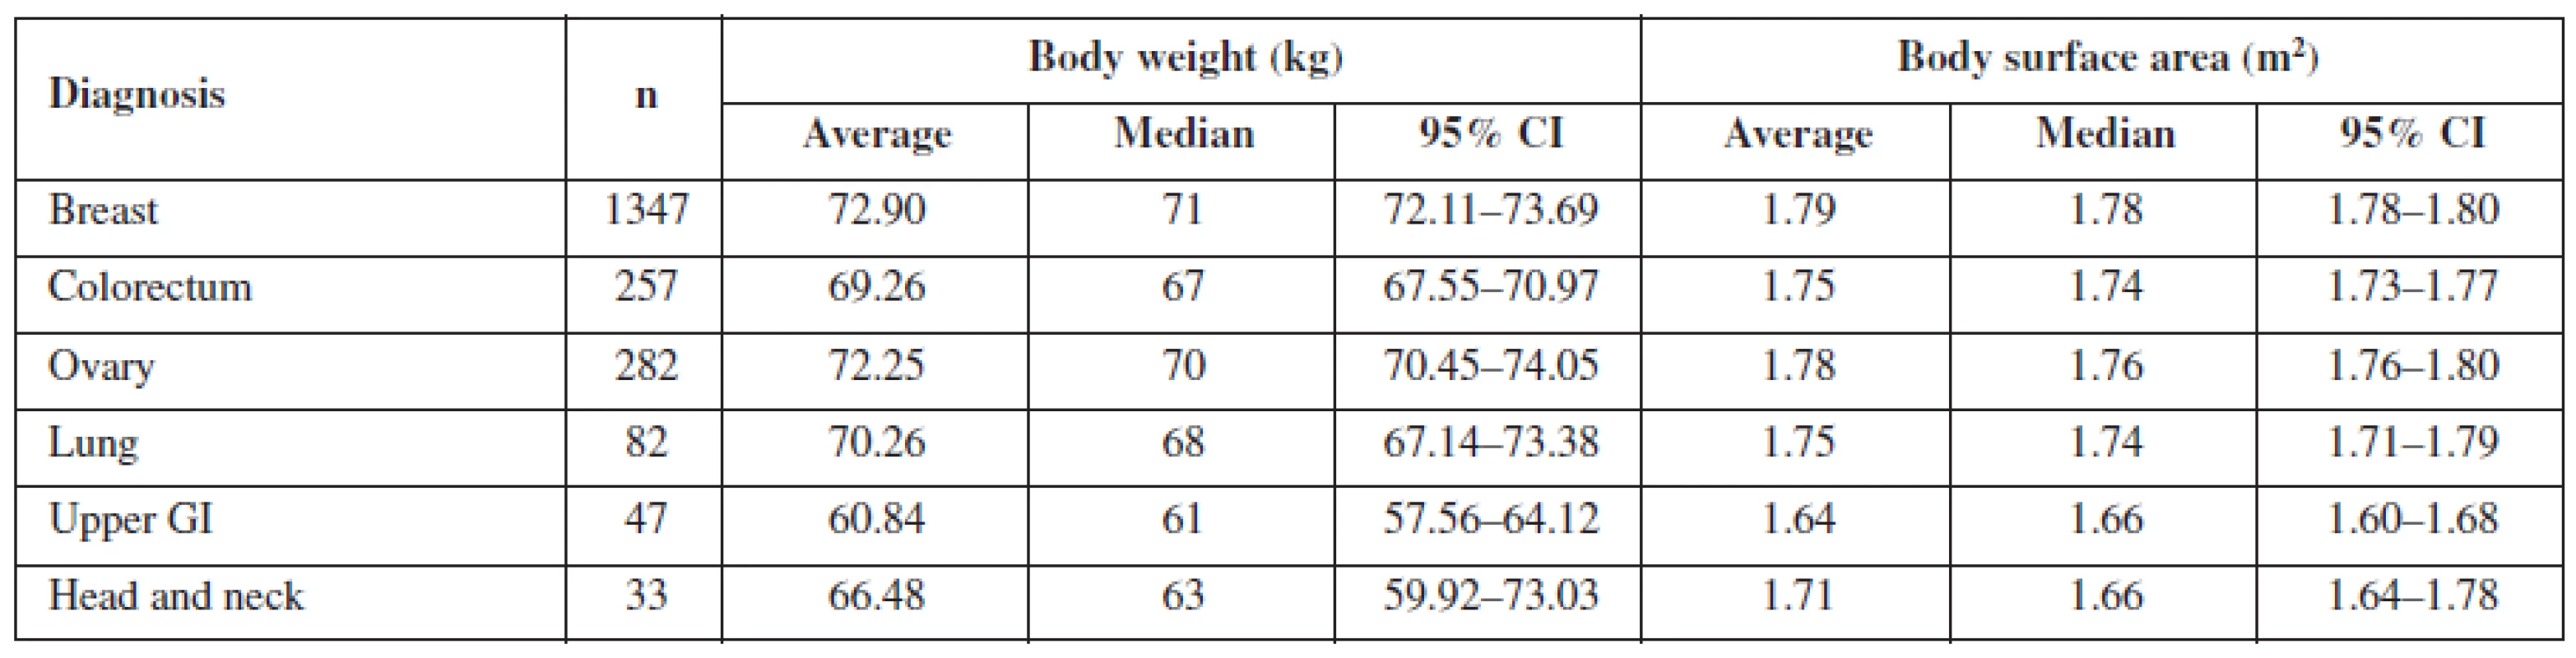 Mean body weight and mean body surface area for particular diagnoses in women